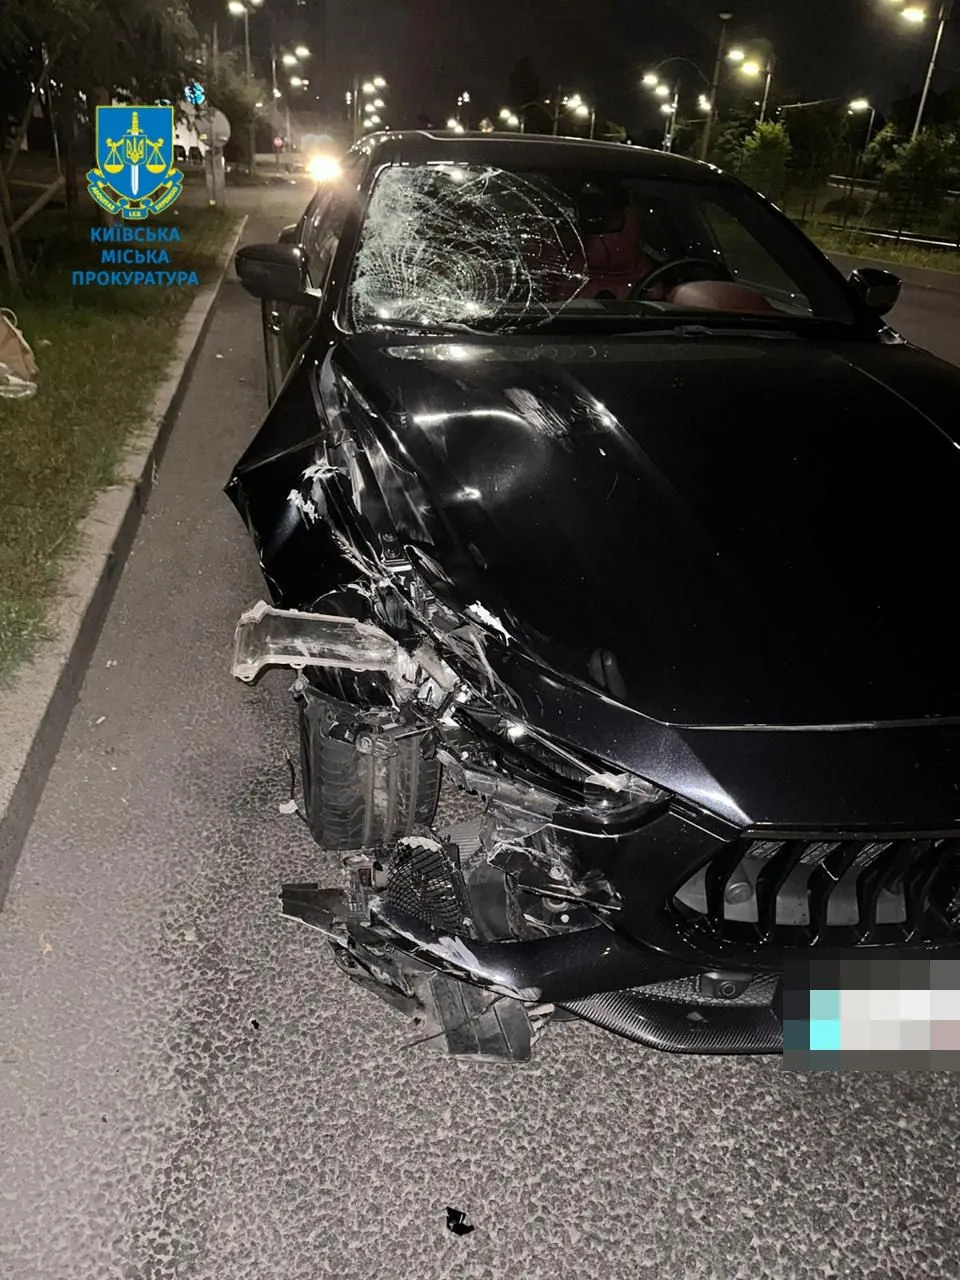 a-maserati-collided-with-a-moped-in-kyiv-at-night-one-victim-the-driver-of-the-car-was-notified-of-suspicion